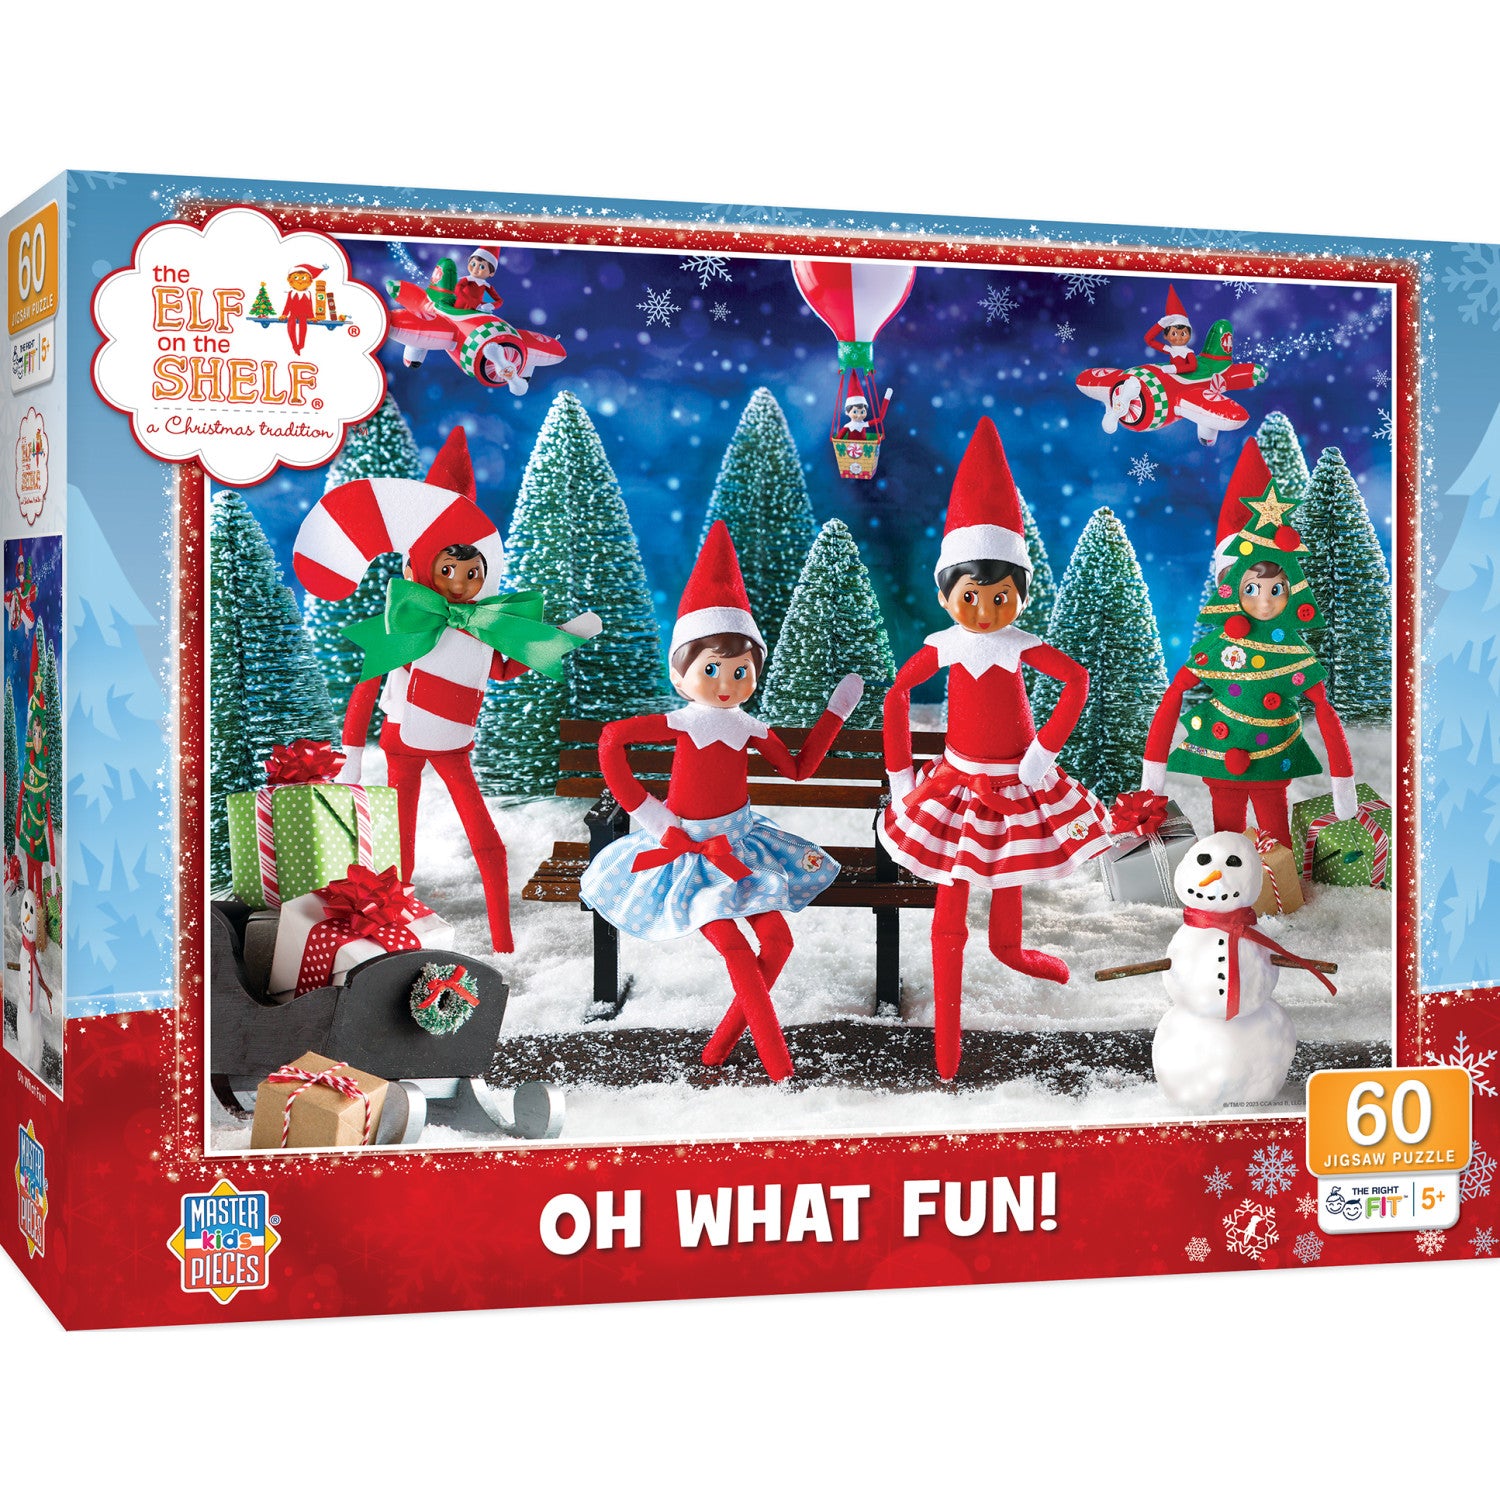 Elf on the Shelf - Oh What Fun 60 Piece Jigsaw Puzzle